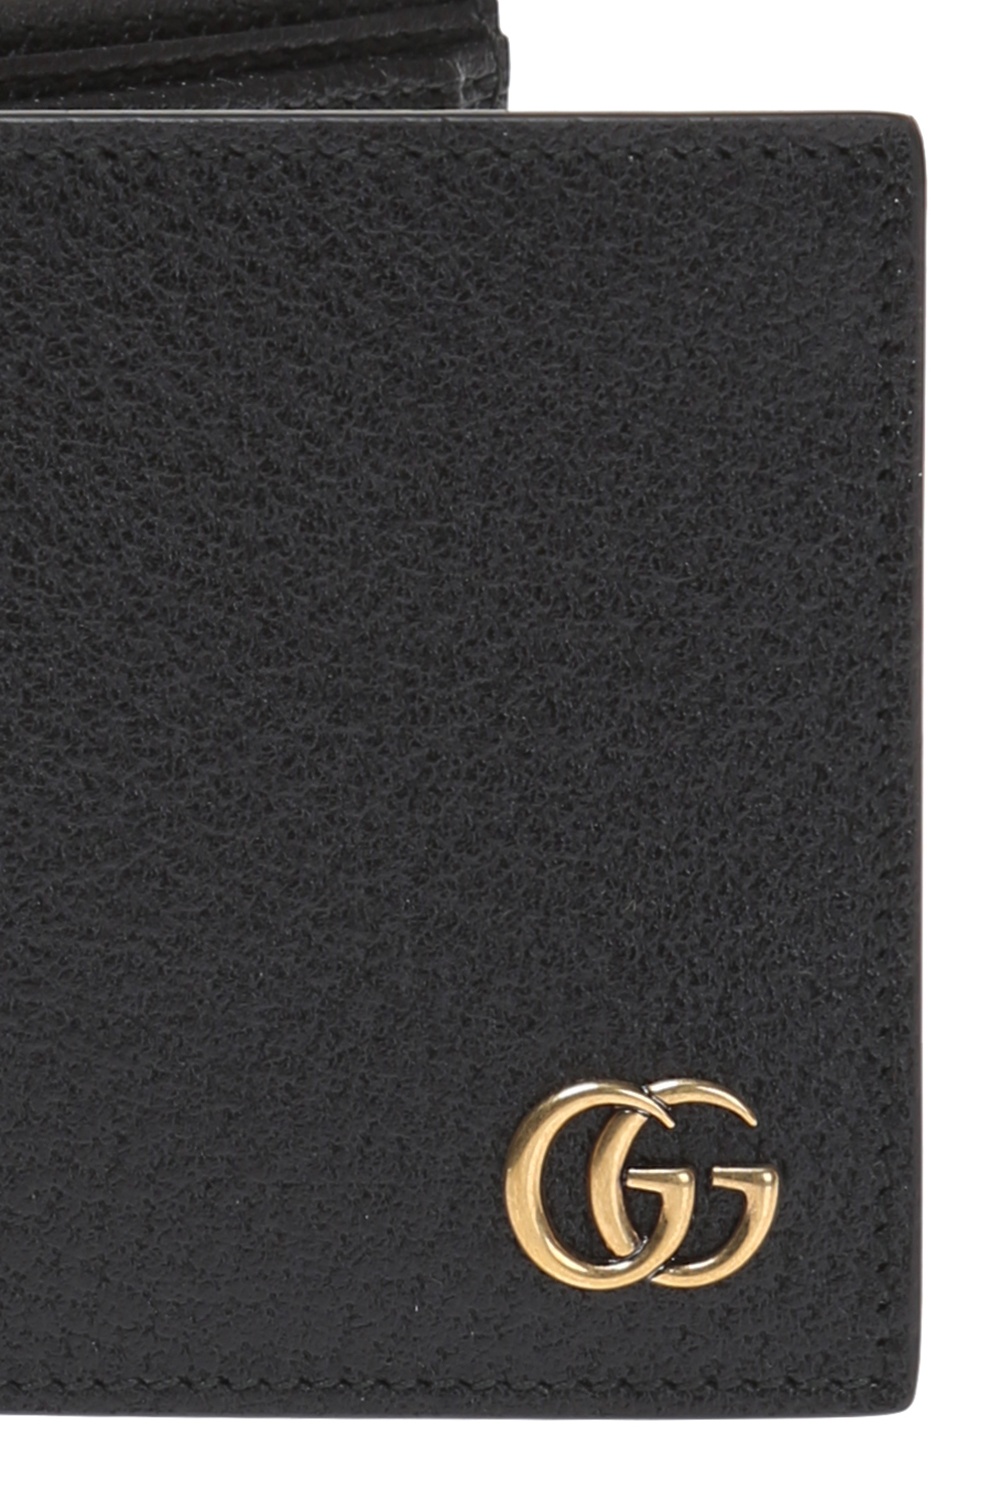 Gucci Men's Bifold Leather Wallet